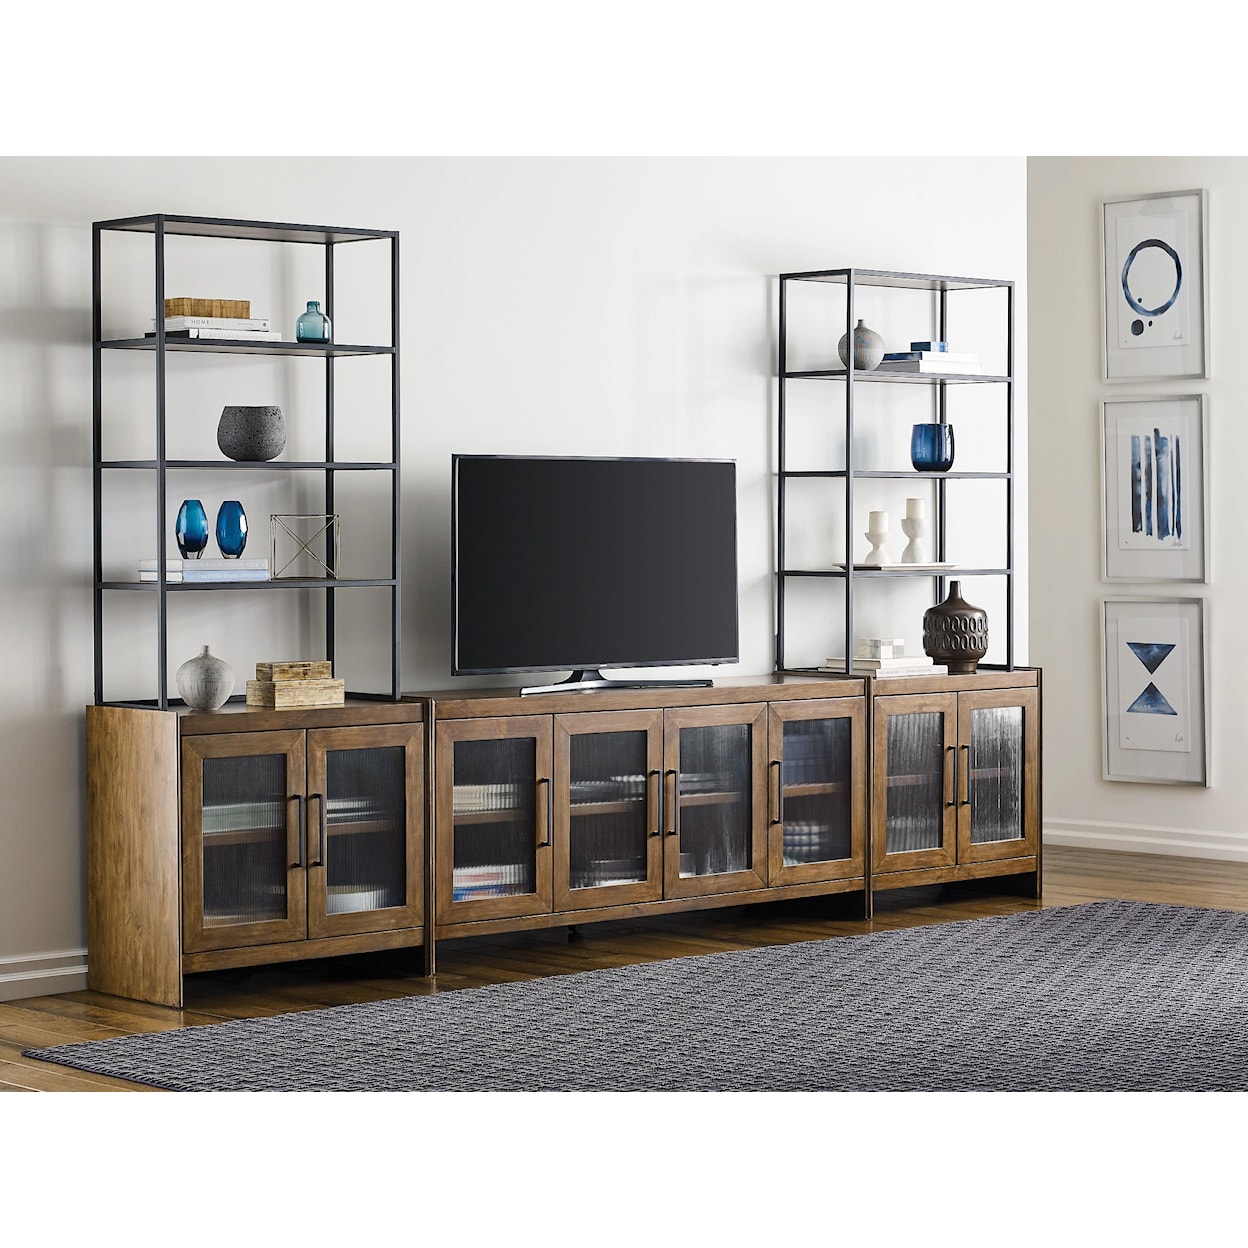 Kincaid Furniture Abode Wagner Cabinet